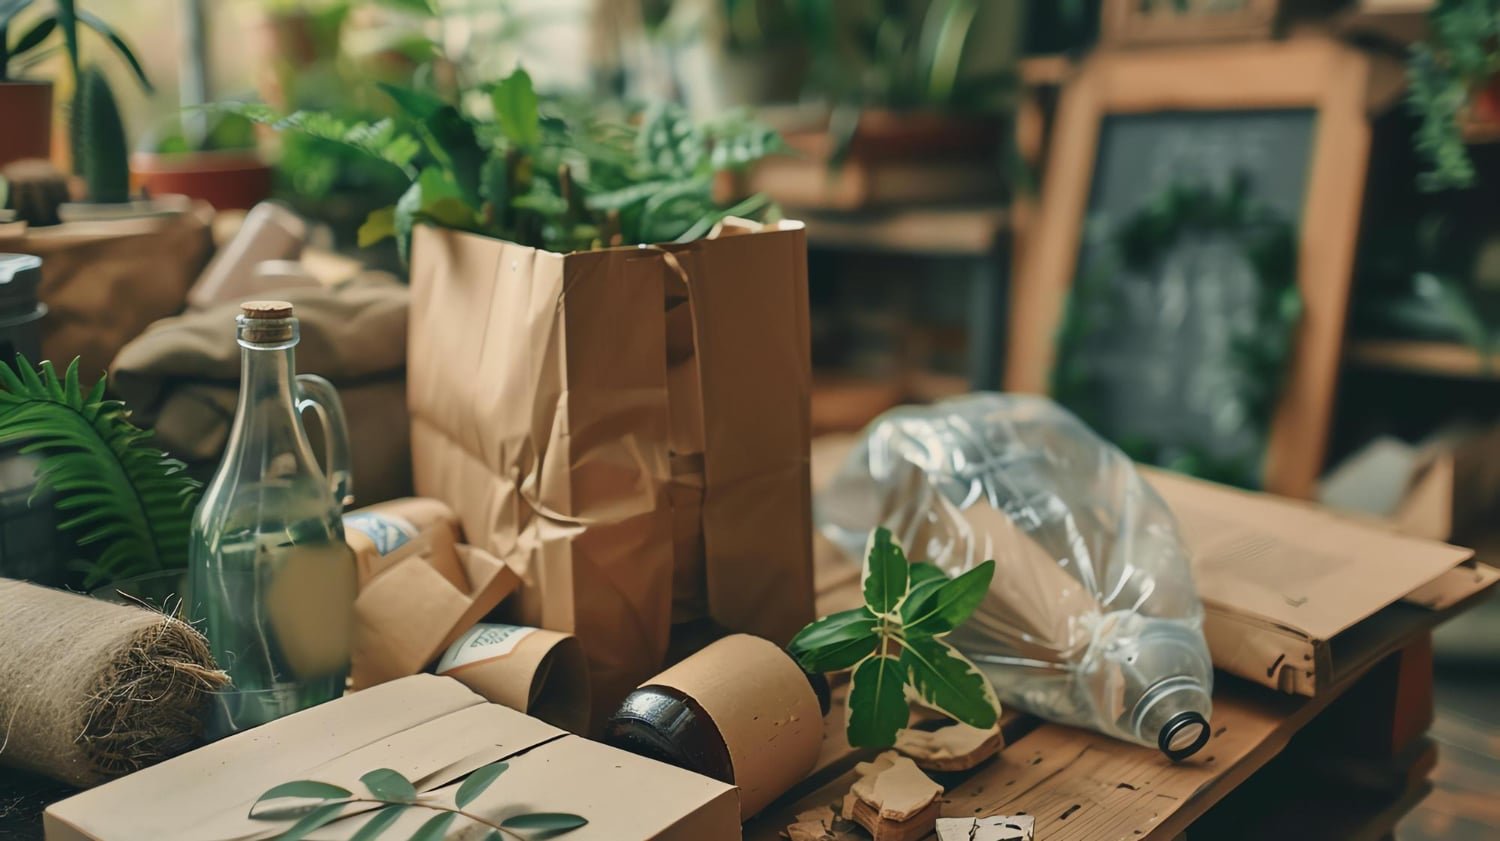 Shop Ethically With Ethical Superstore’s Eco-Friendly Products And Gifts